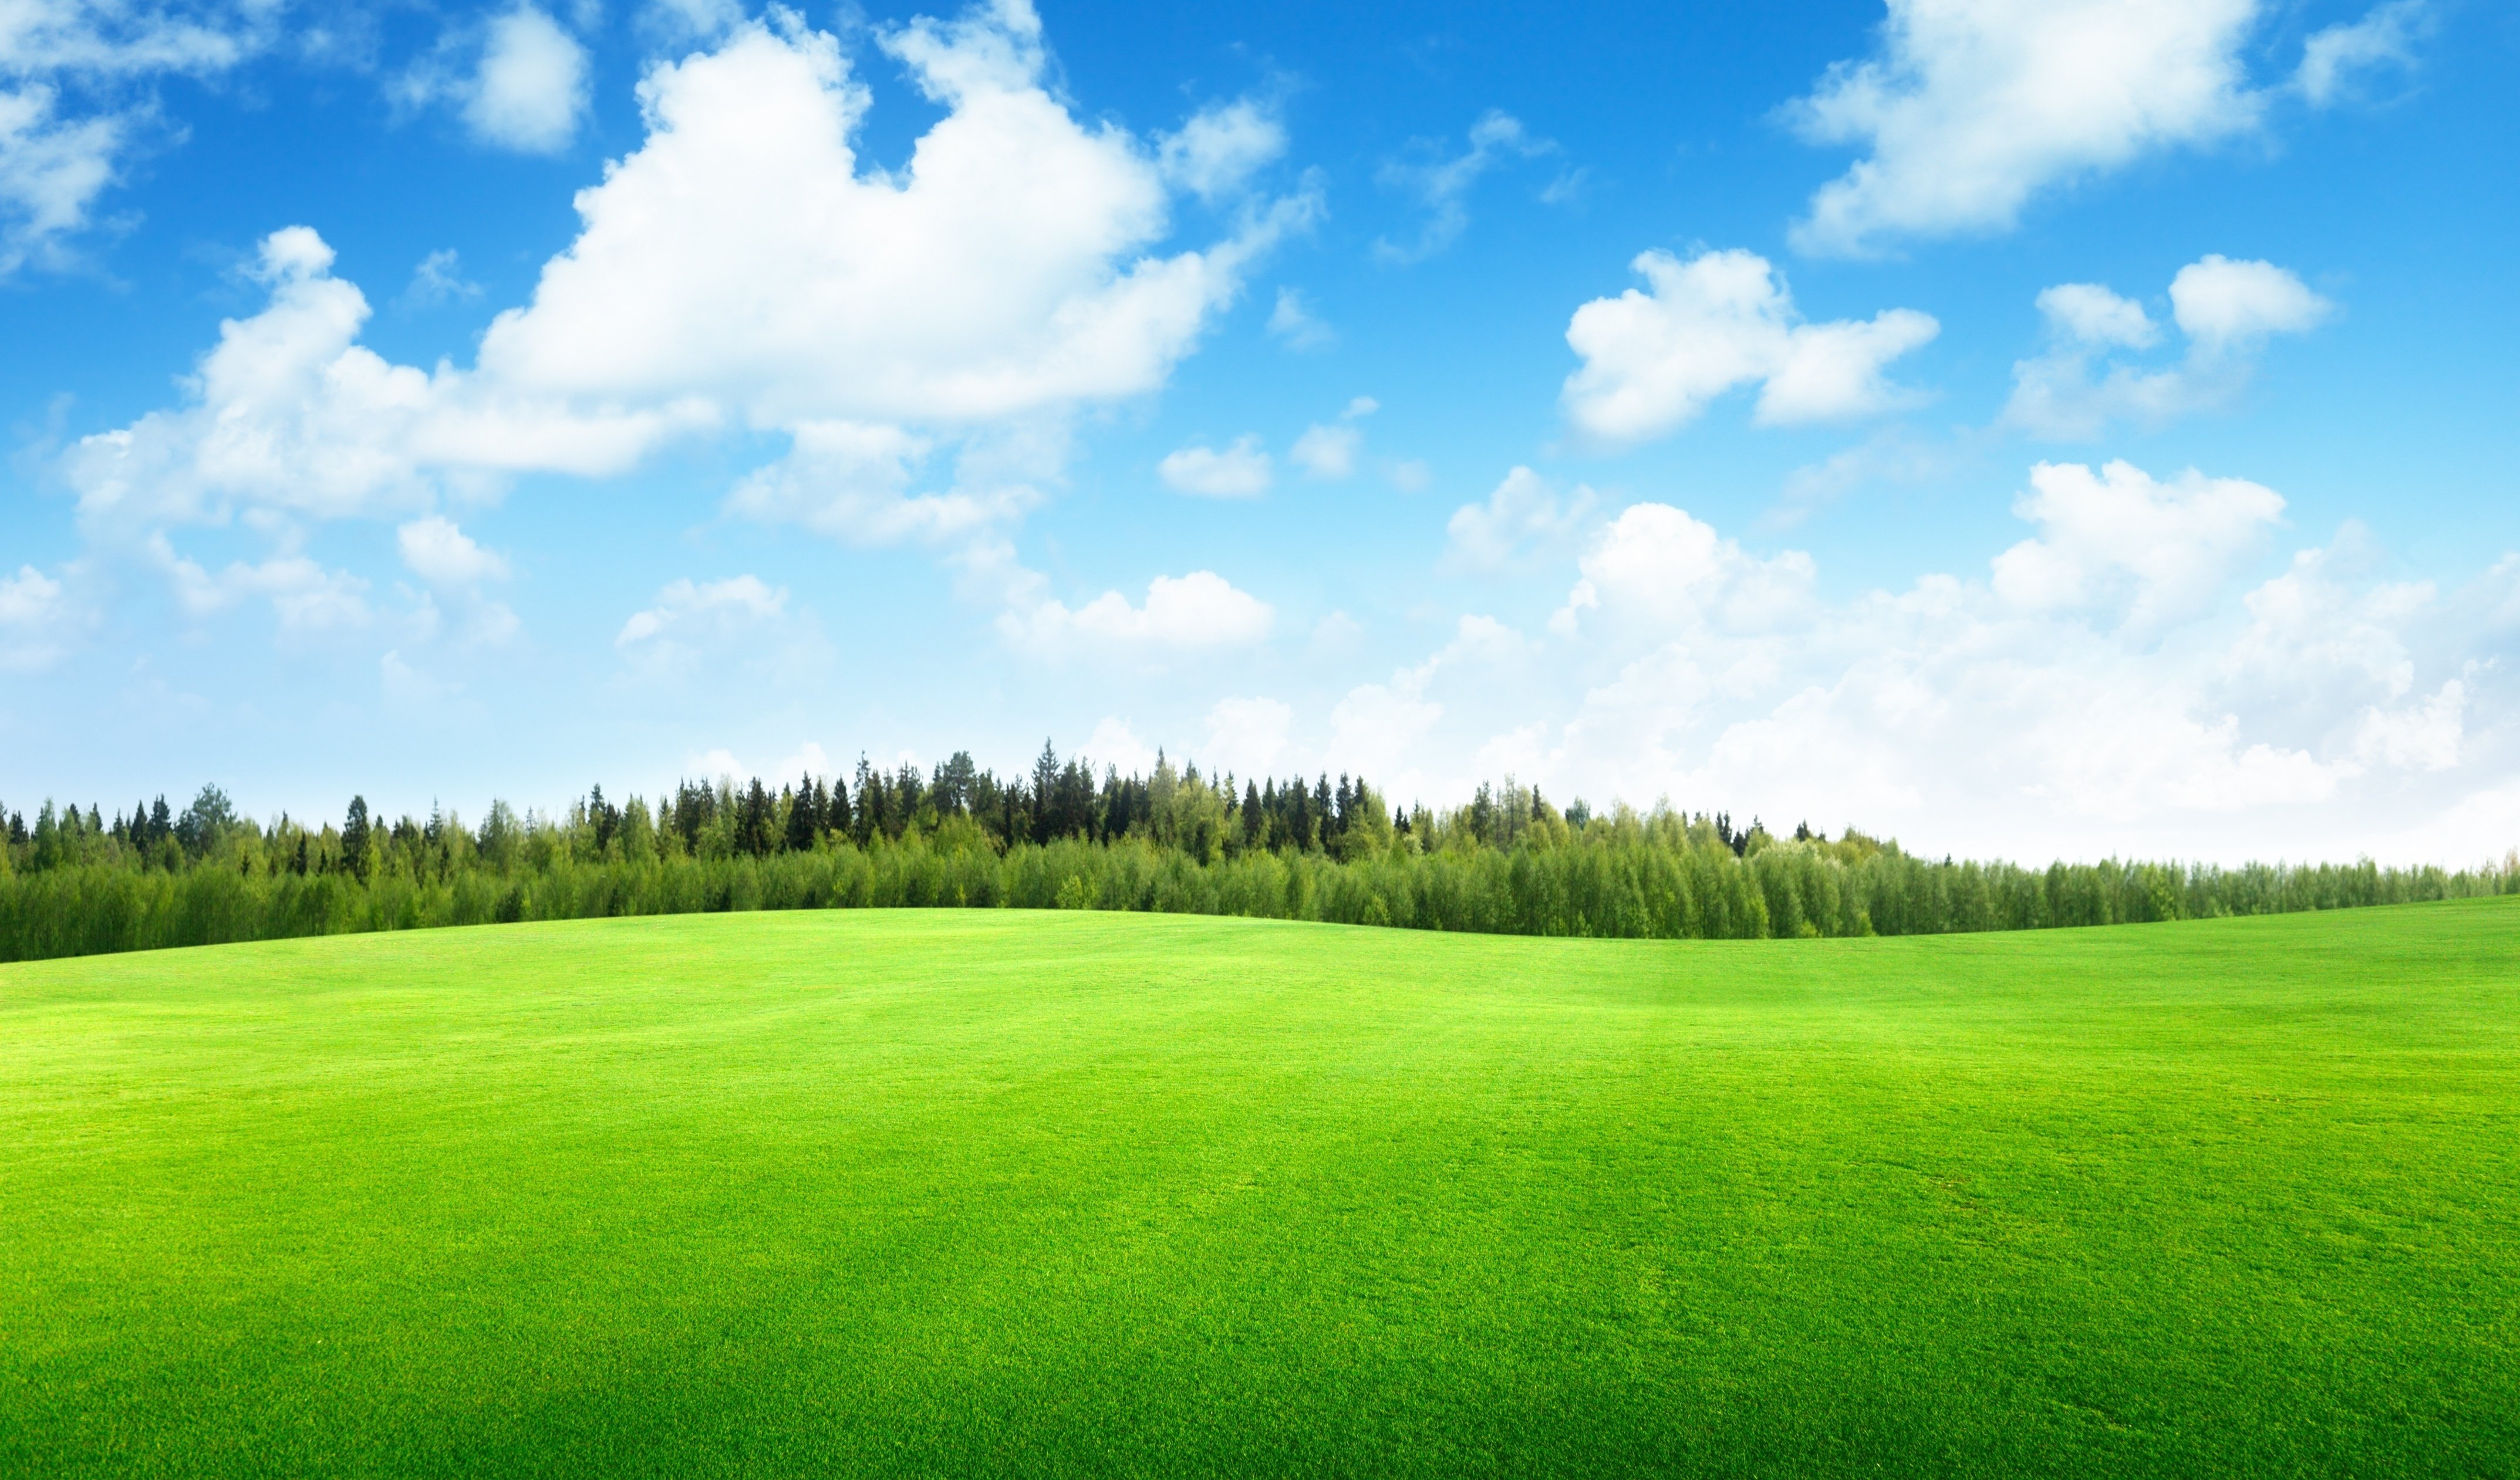 clouds, Trees, Field, Of, Grass, Beautiful, Nature, Landscape, Sky Wallpaper